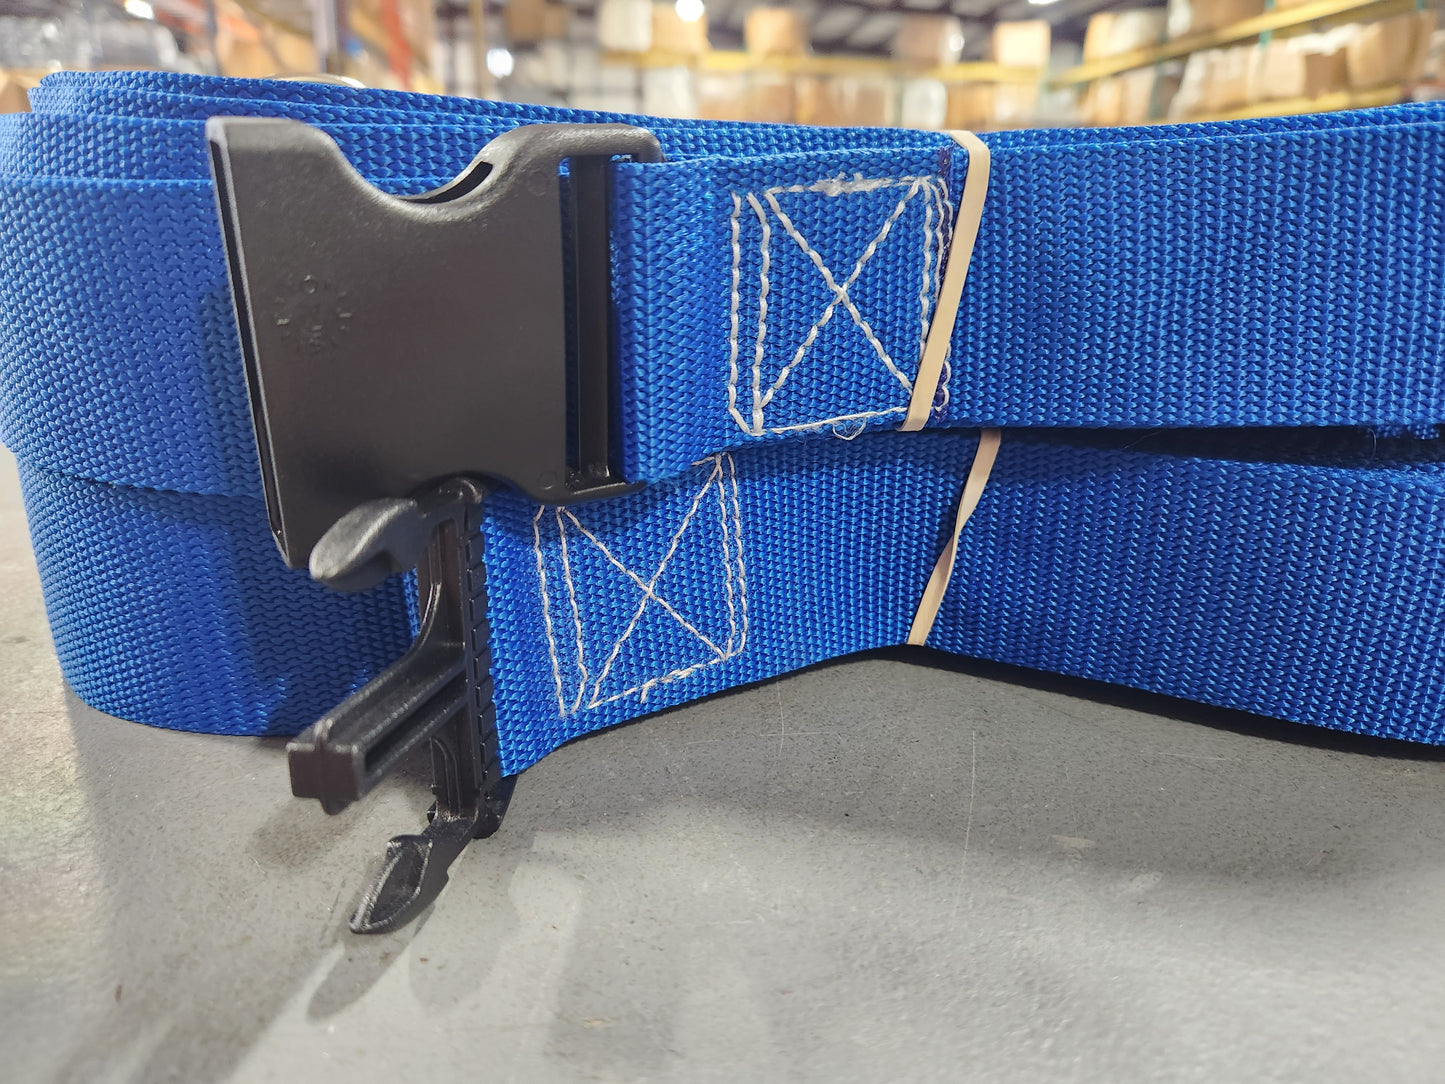 CLEARANCE ITEM #69: M819NAS,Blue: Volleyball Boundary Adjustable 2-inch Webbing, 26.3' x 52.6', Sand Pegs, Blue)